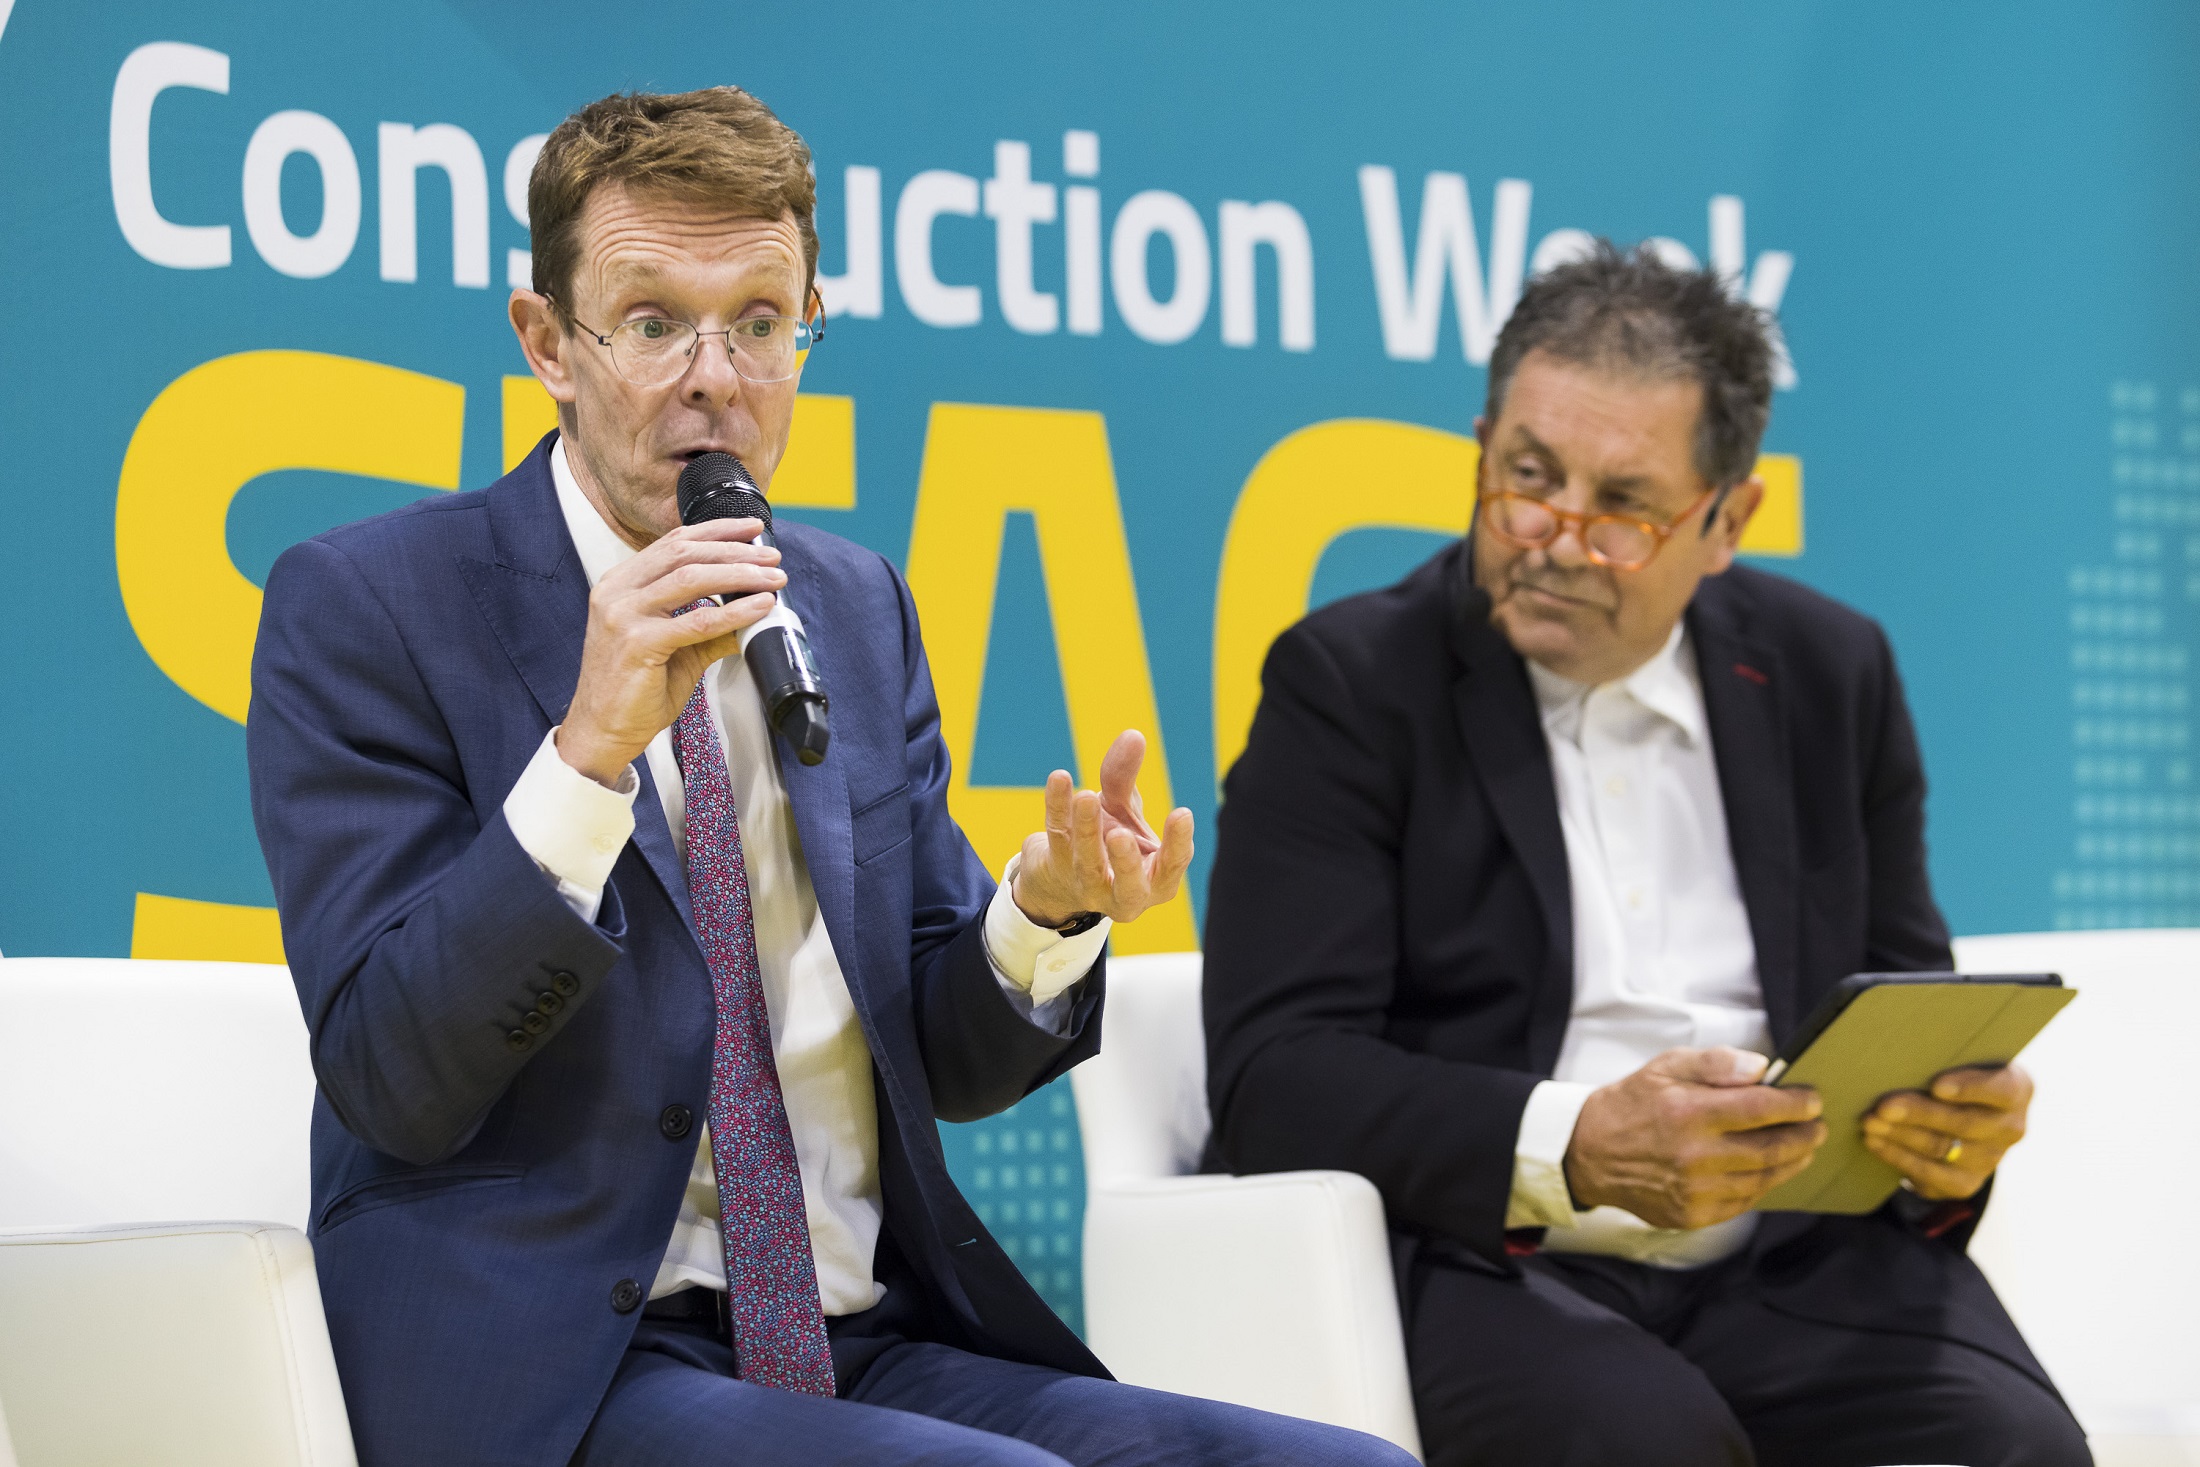 UKCW Birmingham returns this autumn to set the construction agenda and tackle issues head on